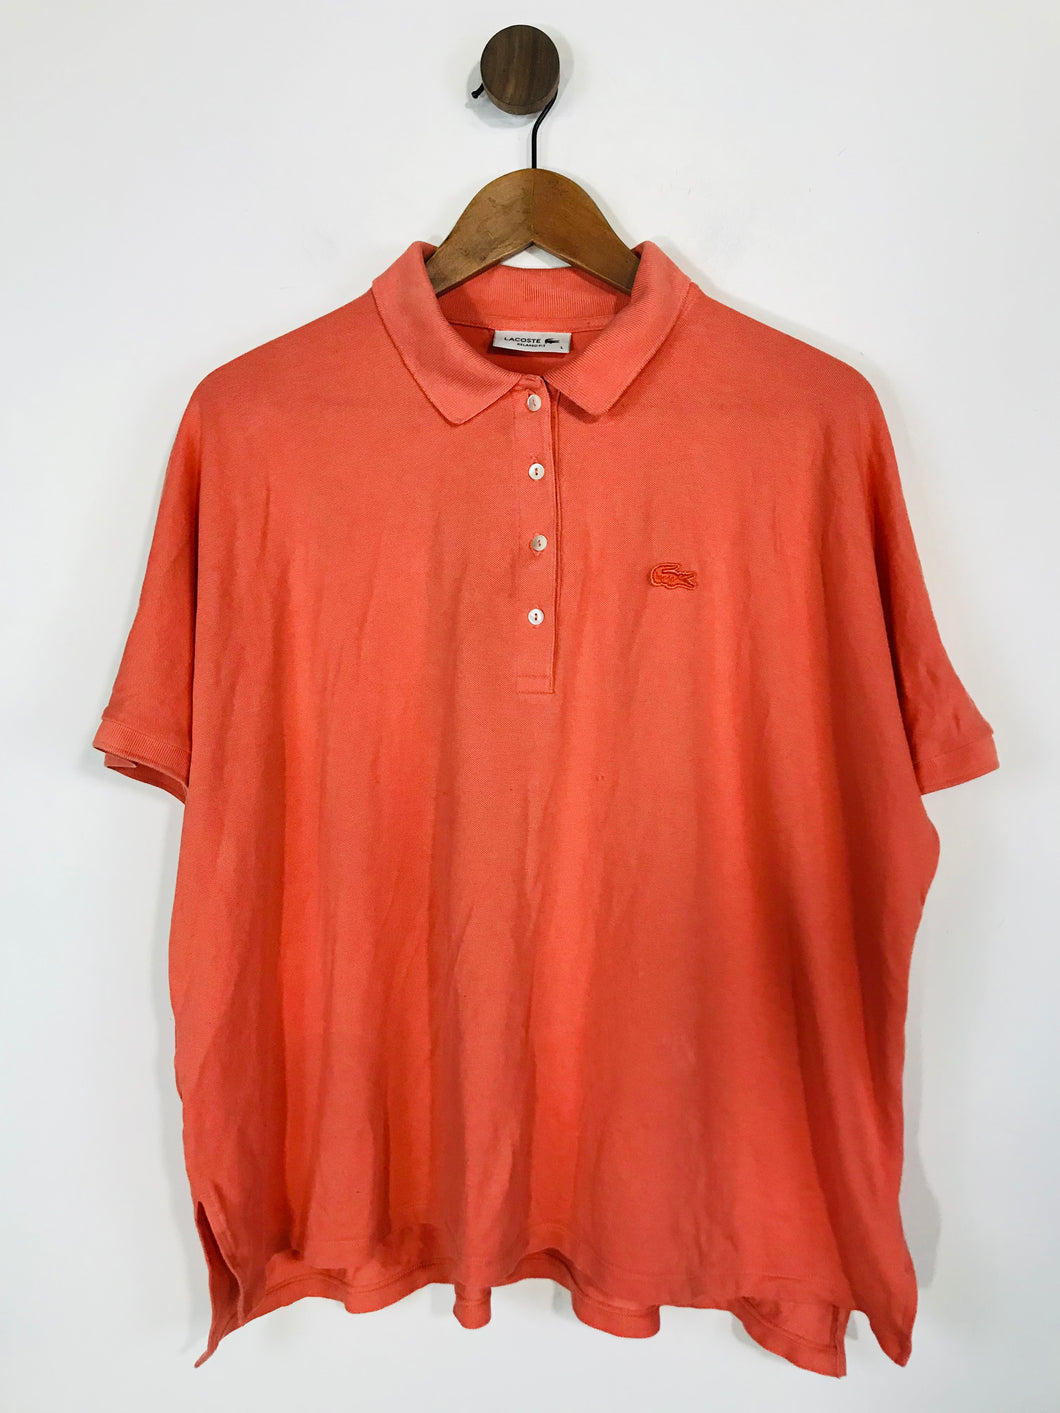 Lacoste Women's Relaxed Fit Polo Shirt | L UK14 | Orange